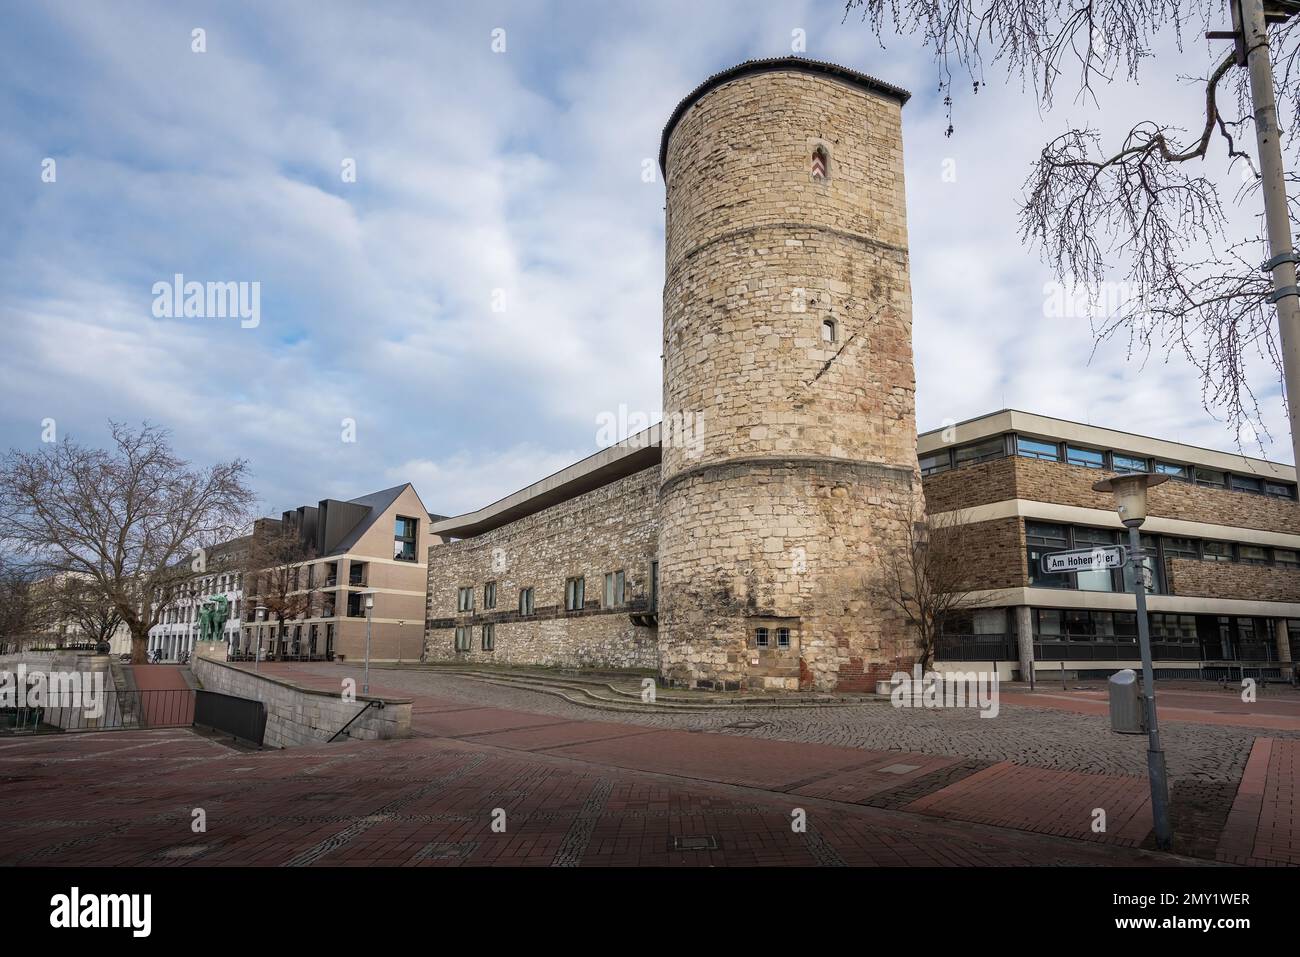 Beguine Tower (Beginenturm) and Arsenal on the High Bank (Zeughaus) - Hanover, Lower Saxony, Germany Stock Photo